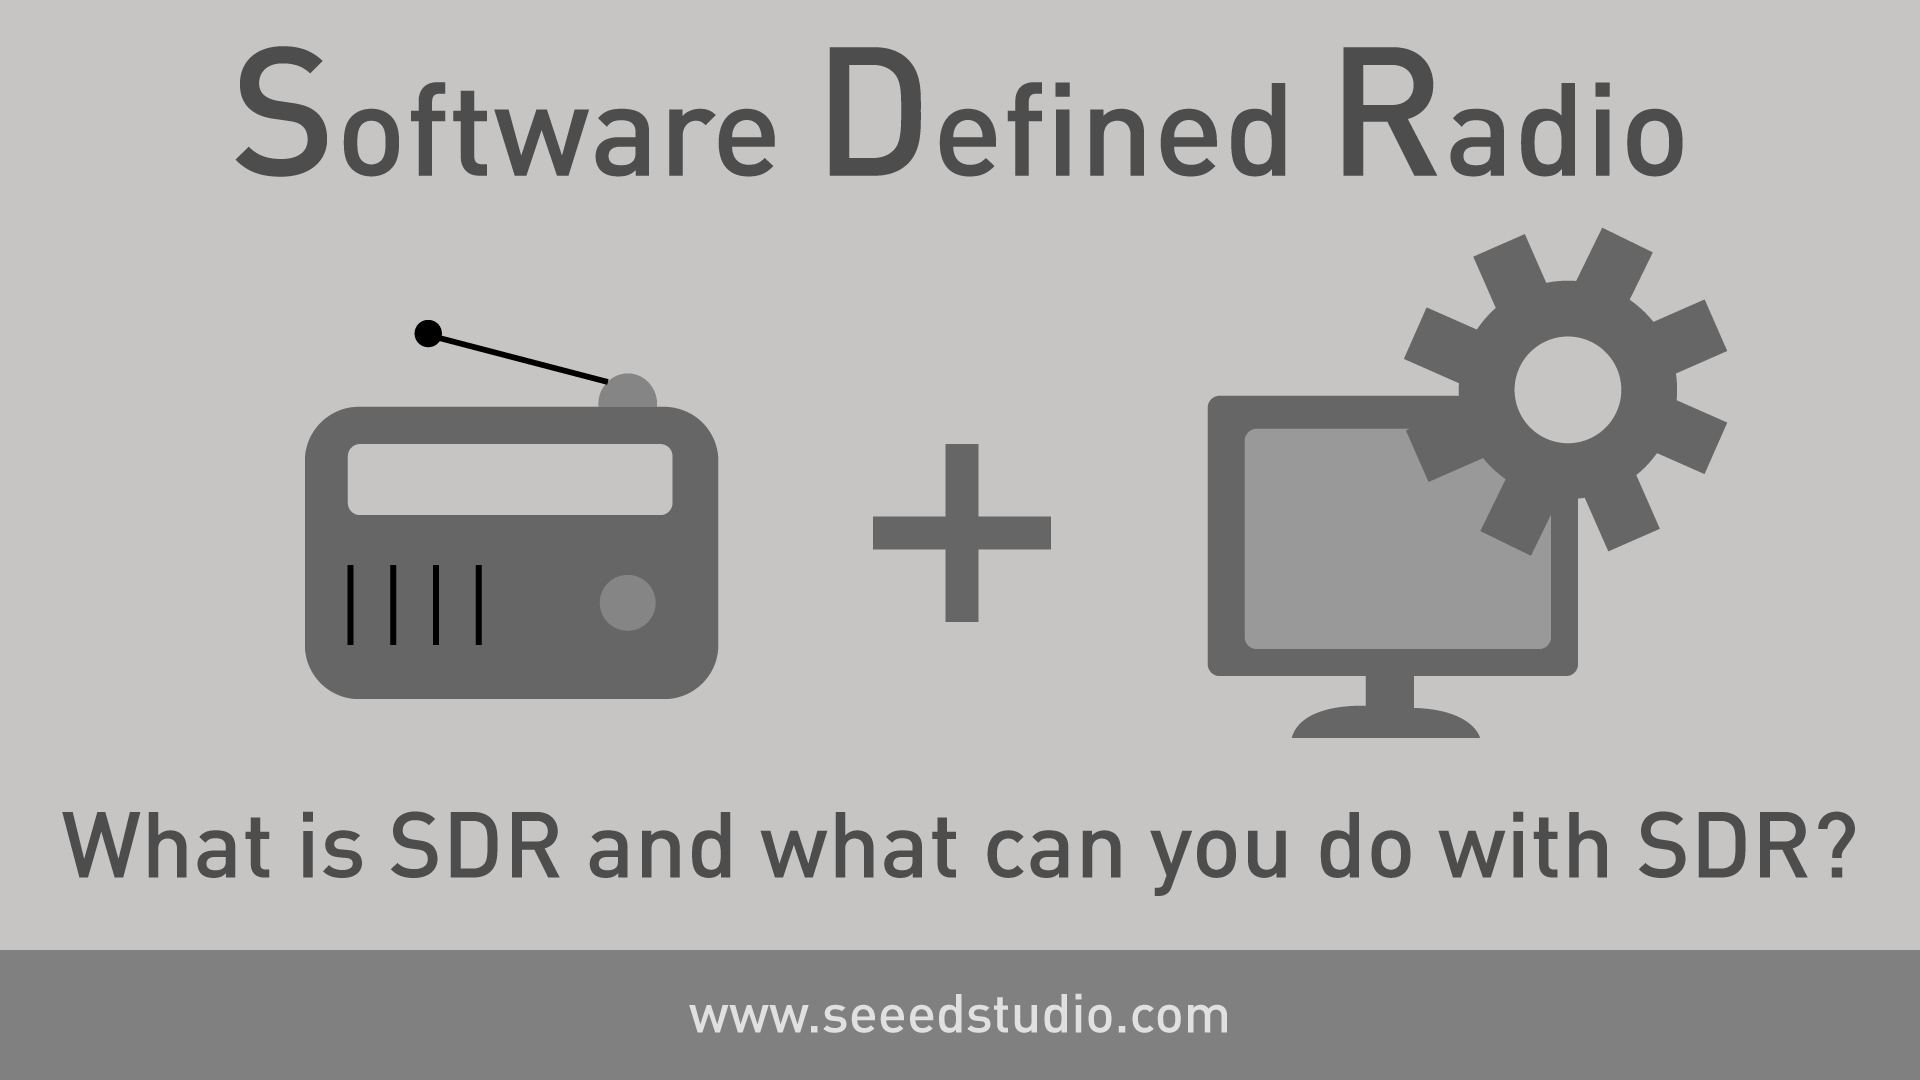 What is software defined radio used for?